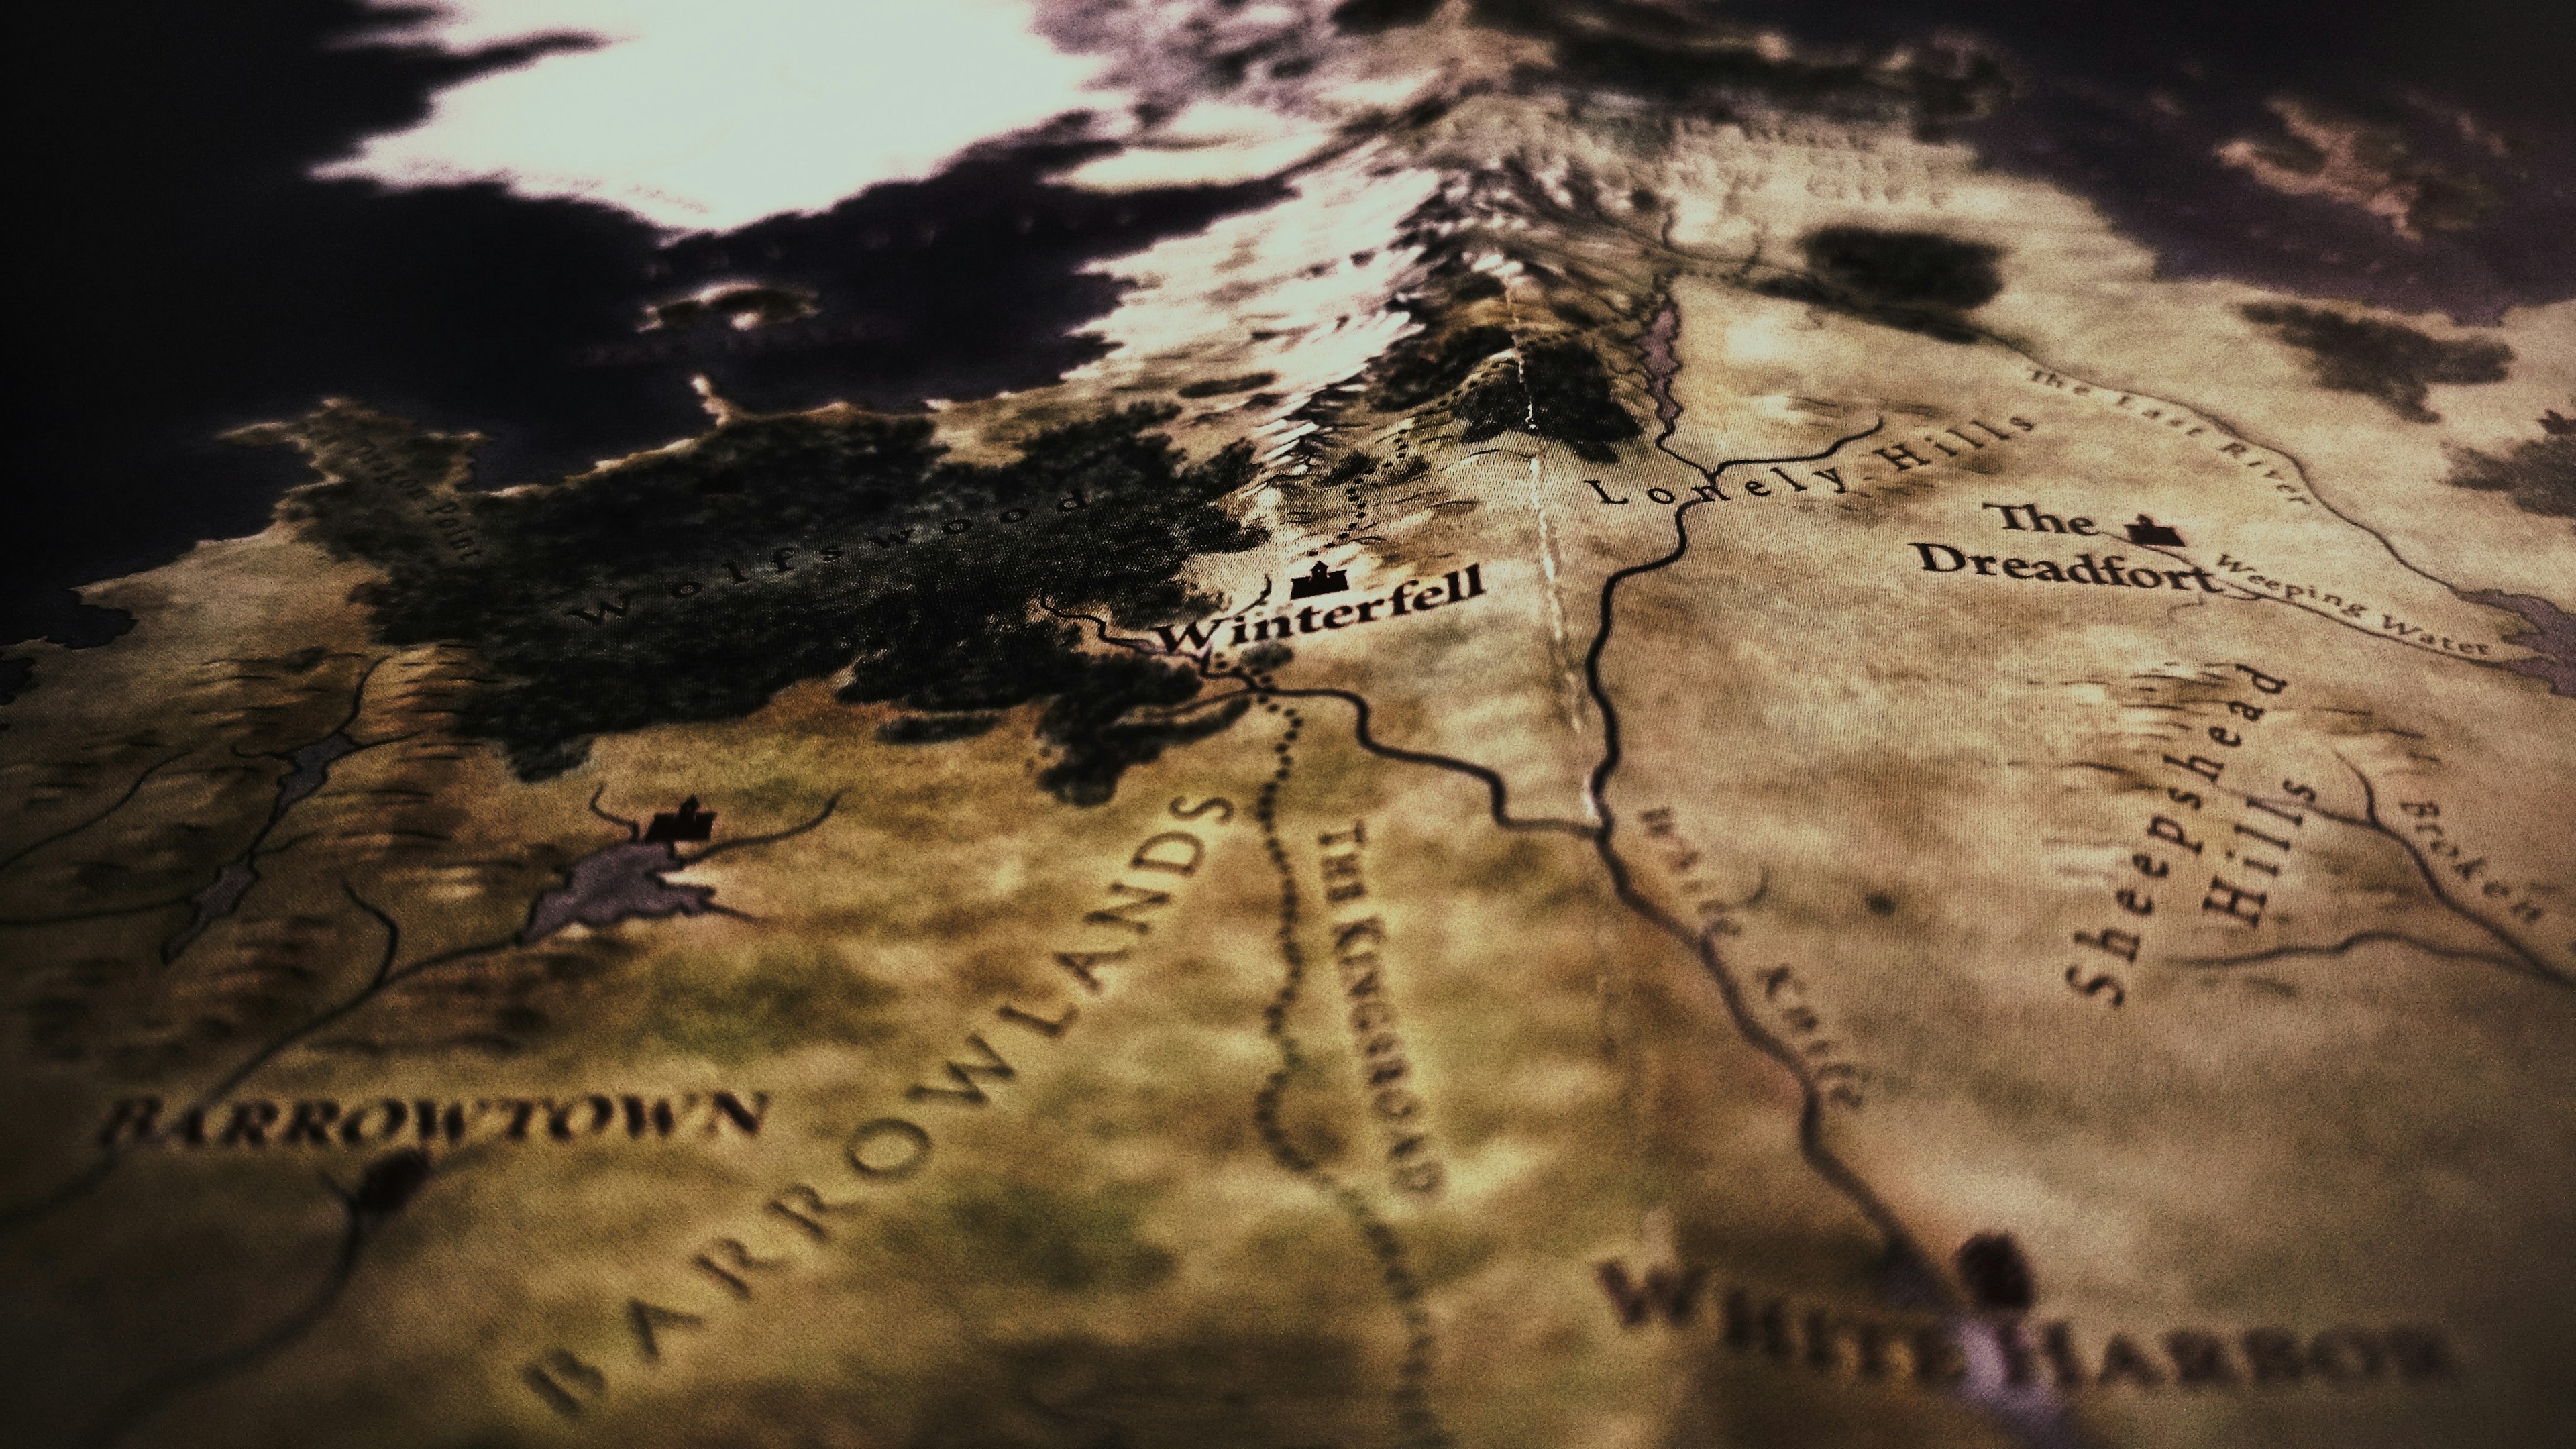 A map of Westeros, from the TV show Game of Thrones.